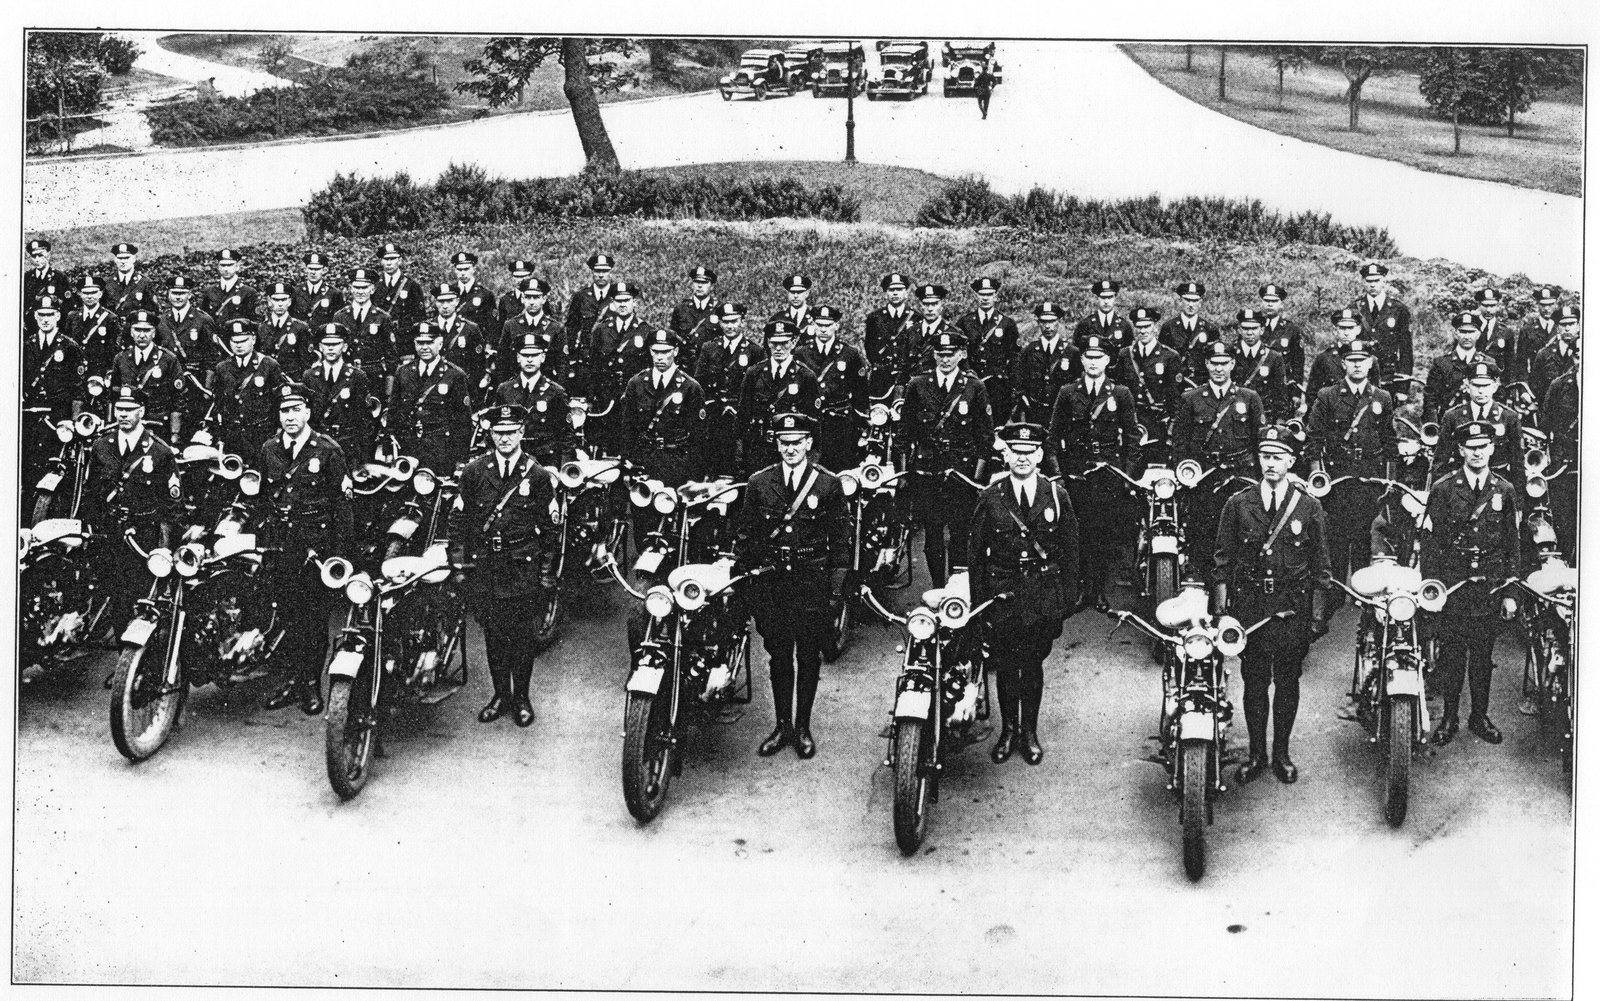 Motorcycle Unit Group